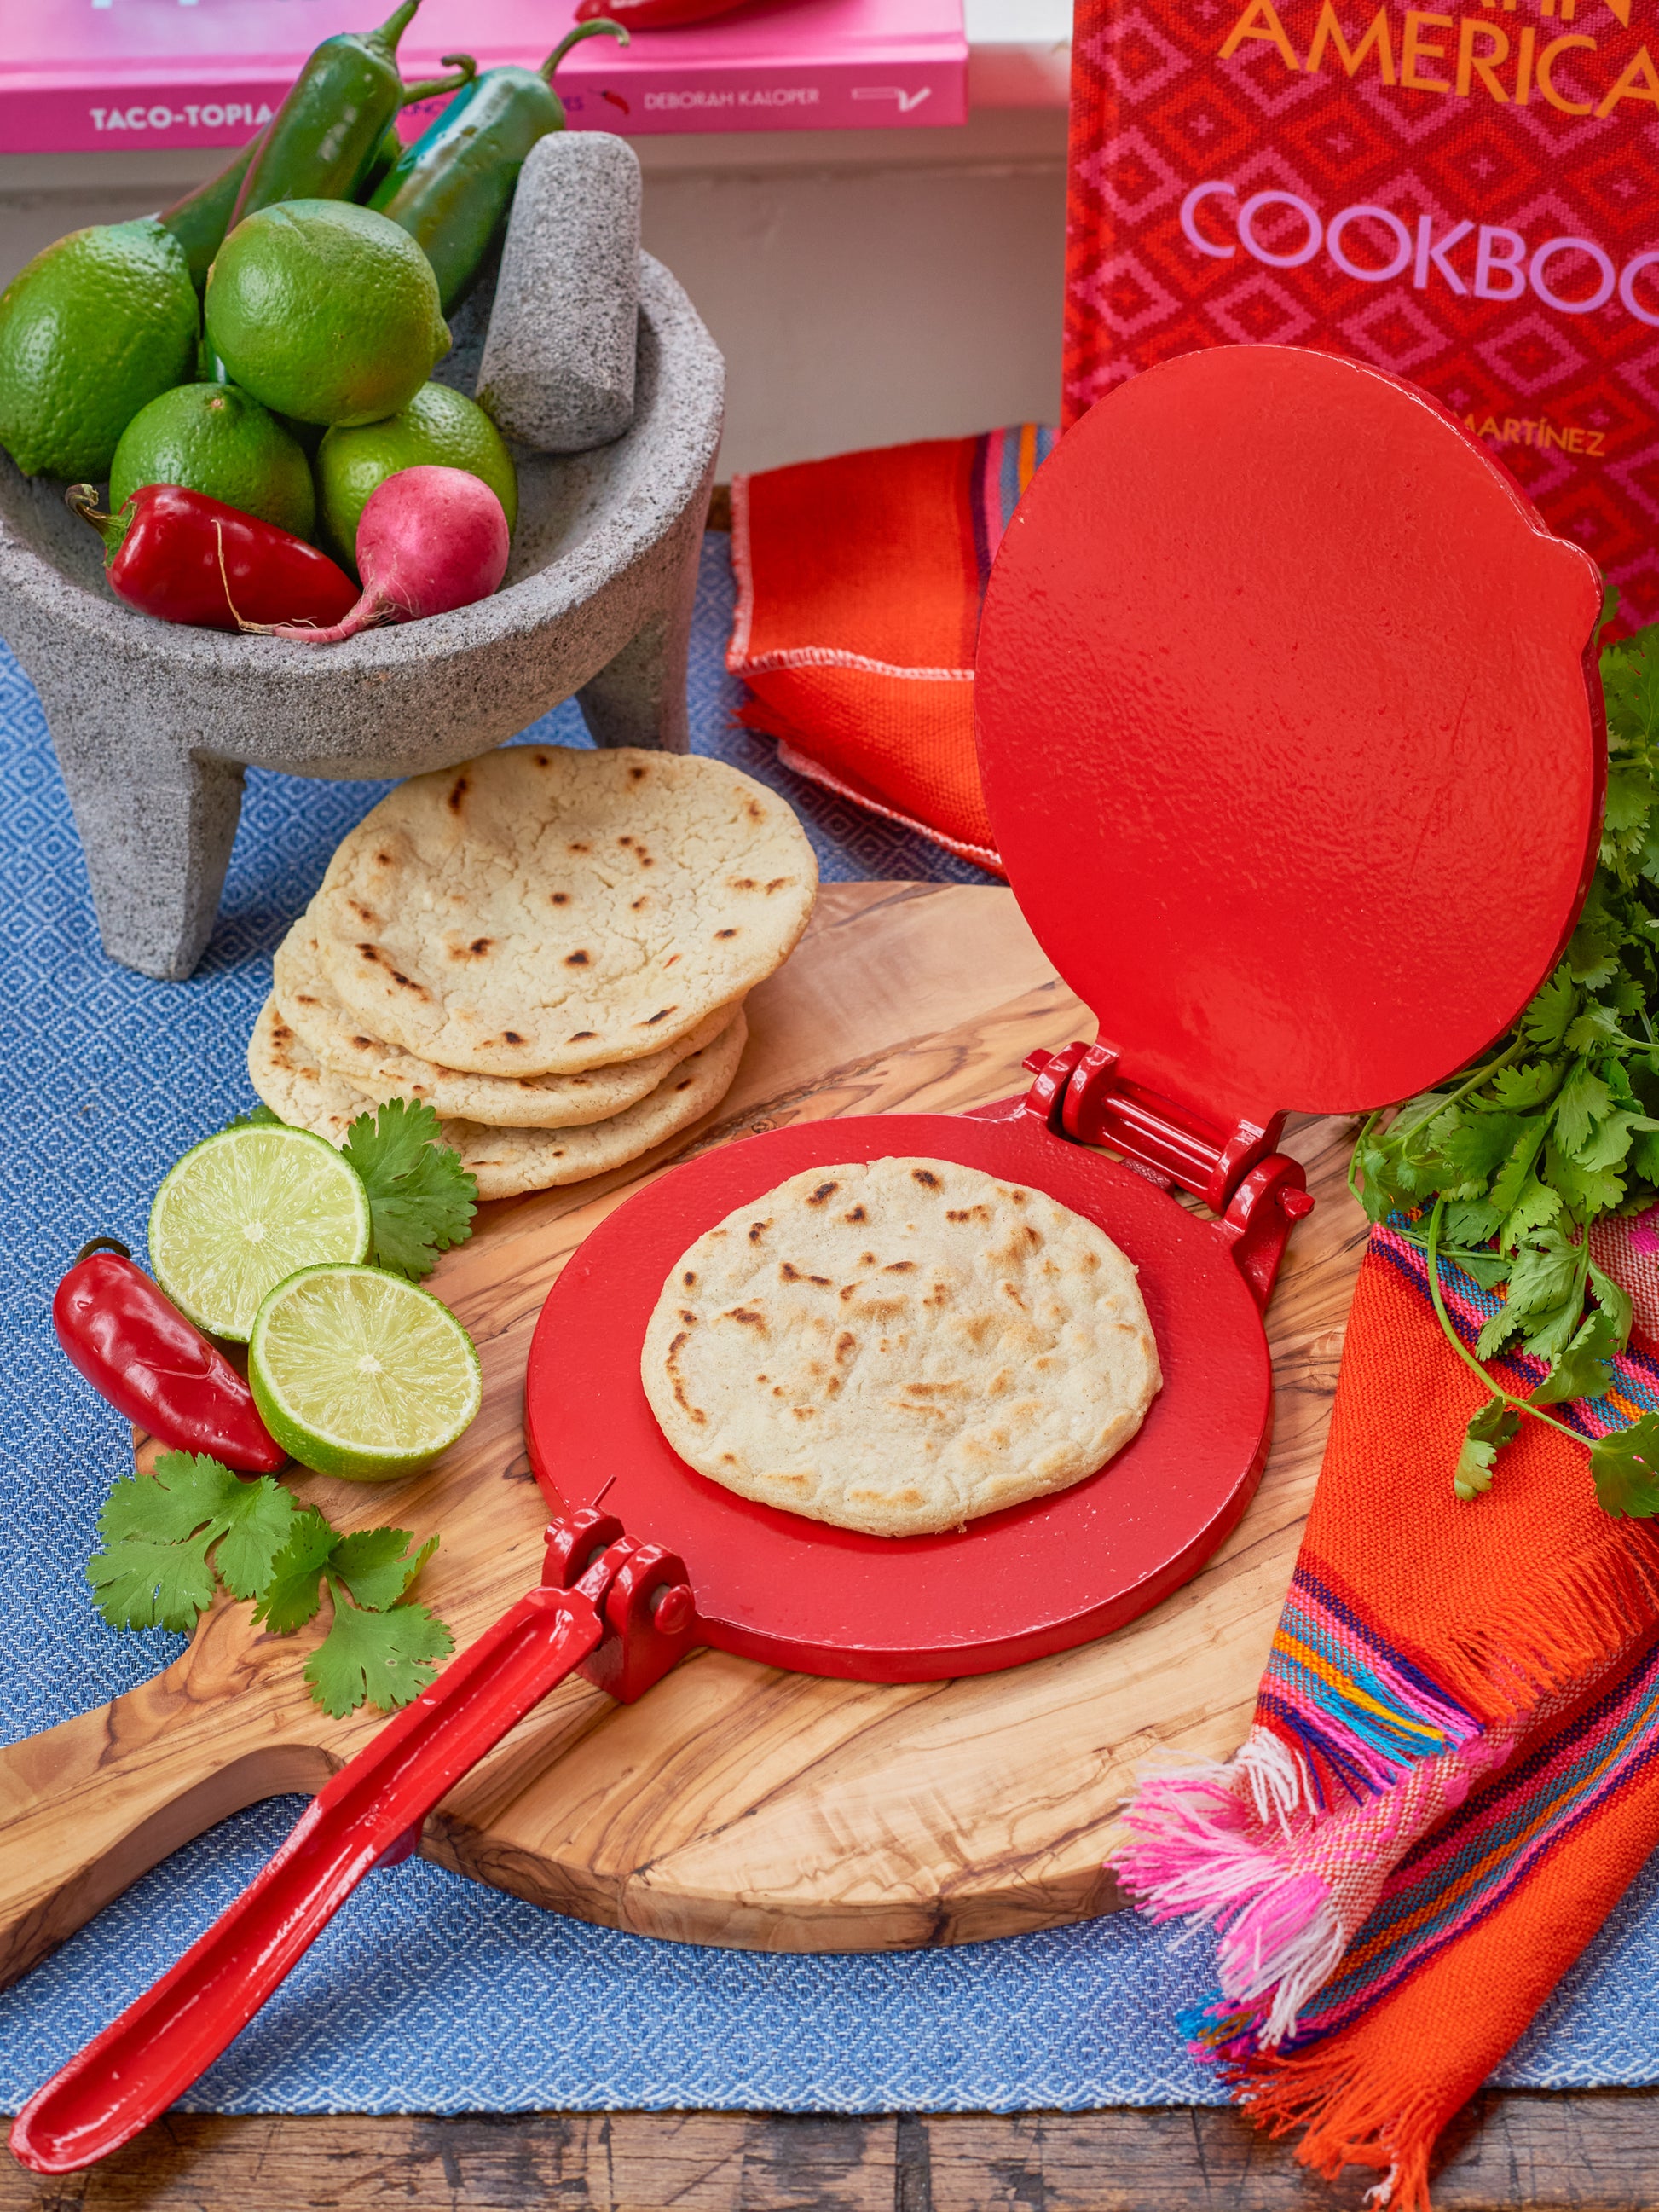 Shop the Red Cast Iron Tortilla Press Kit at Weston Table